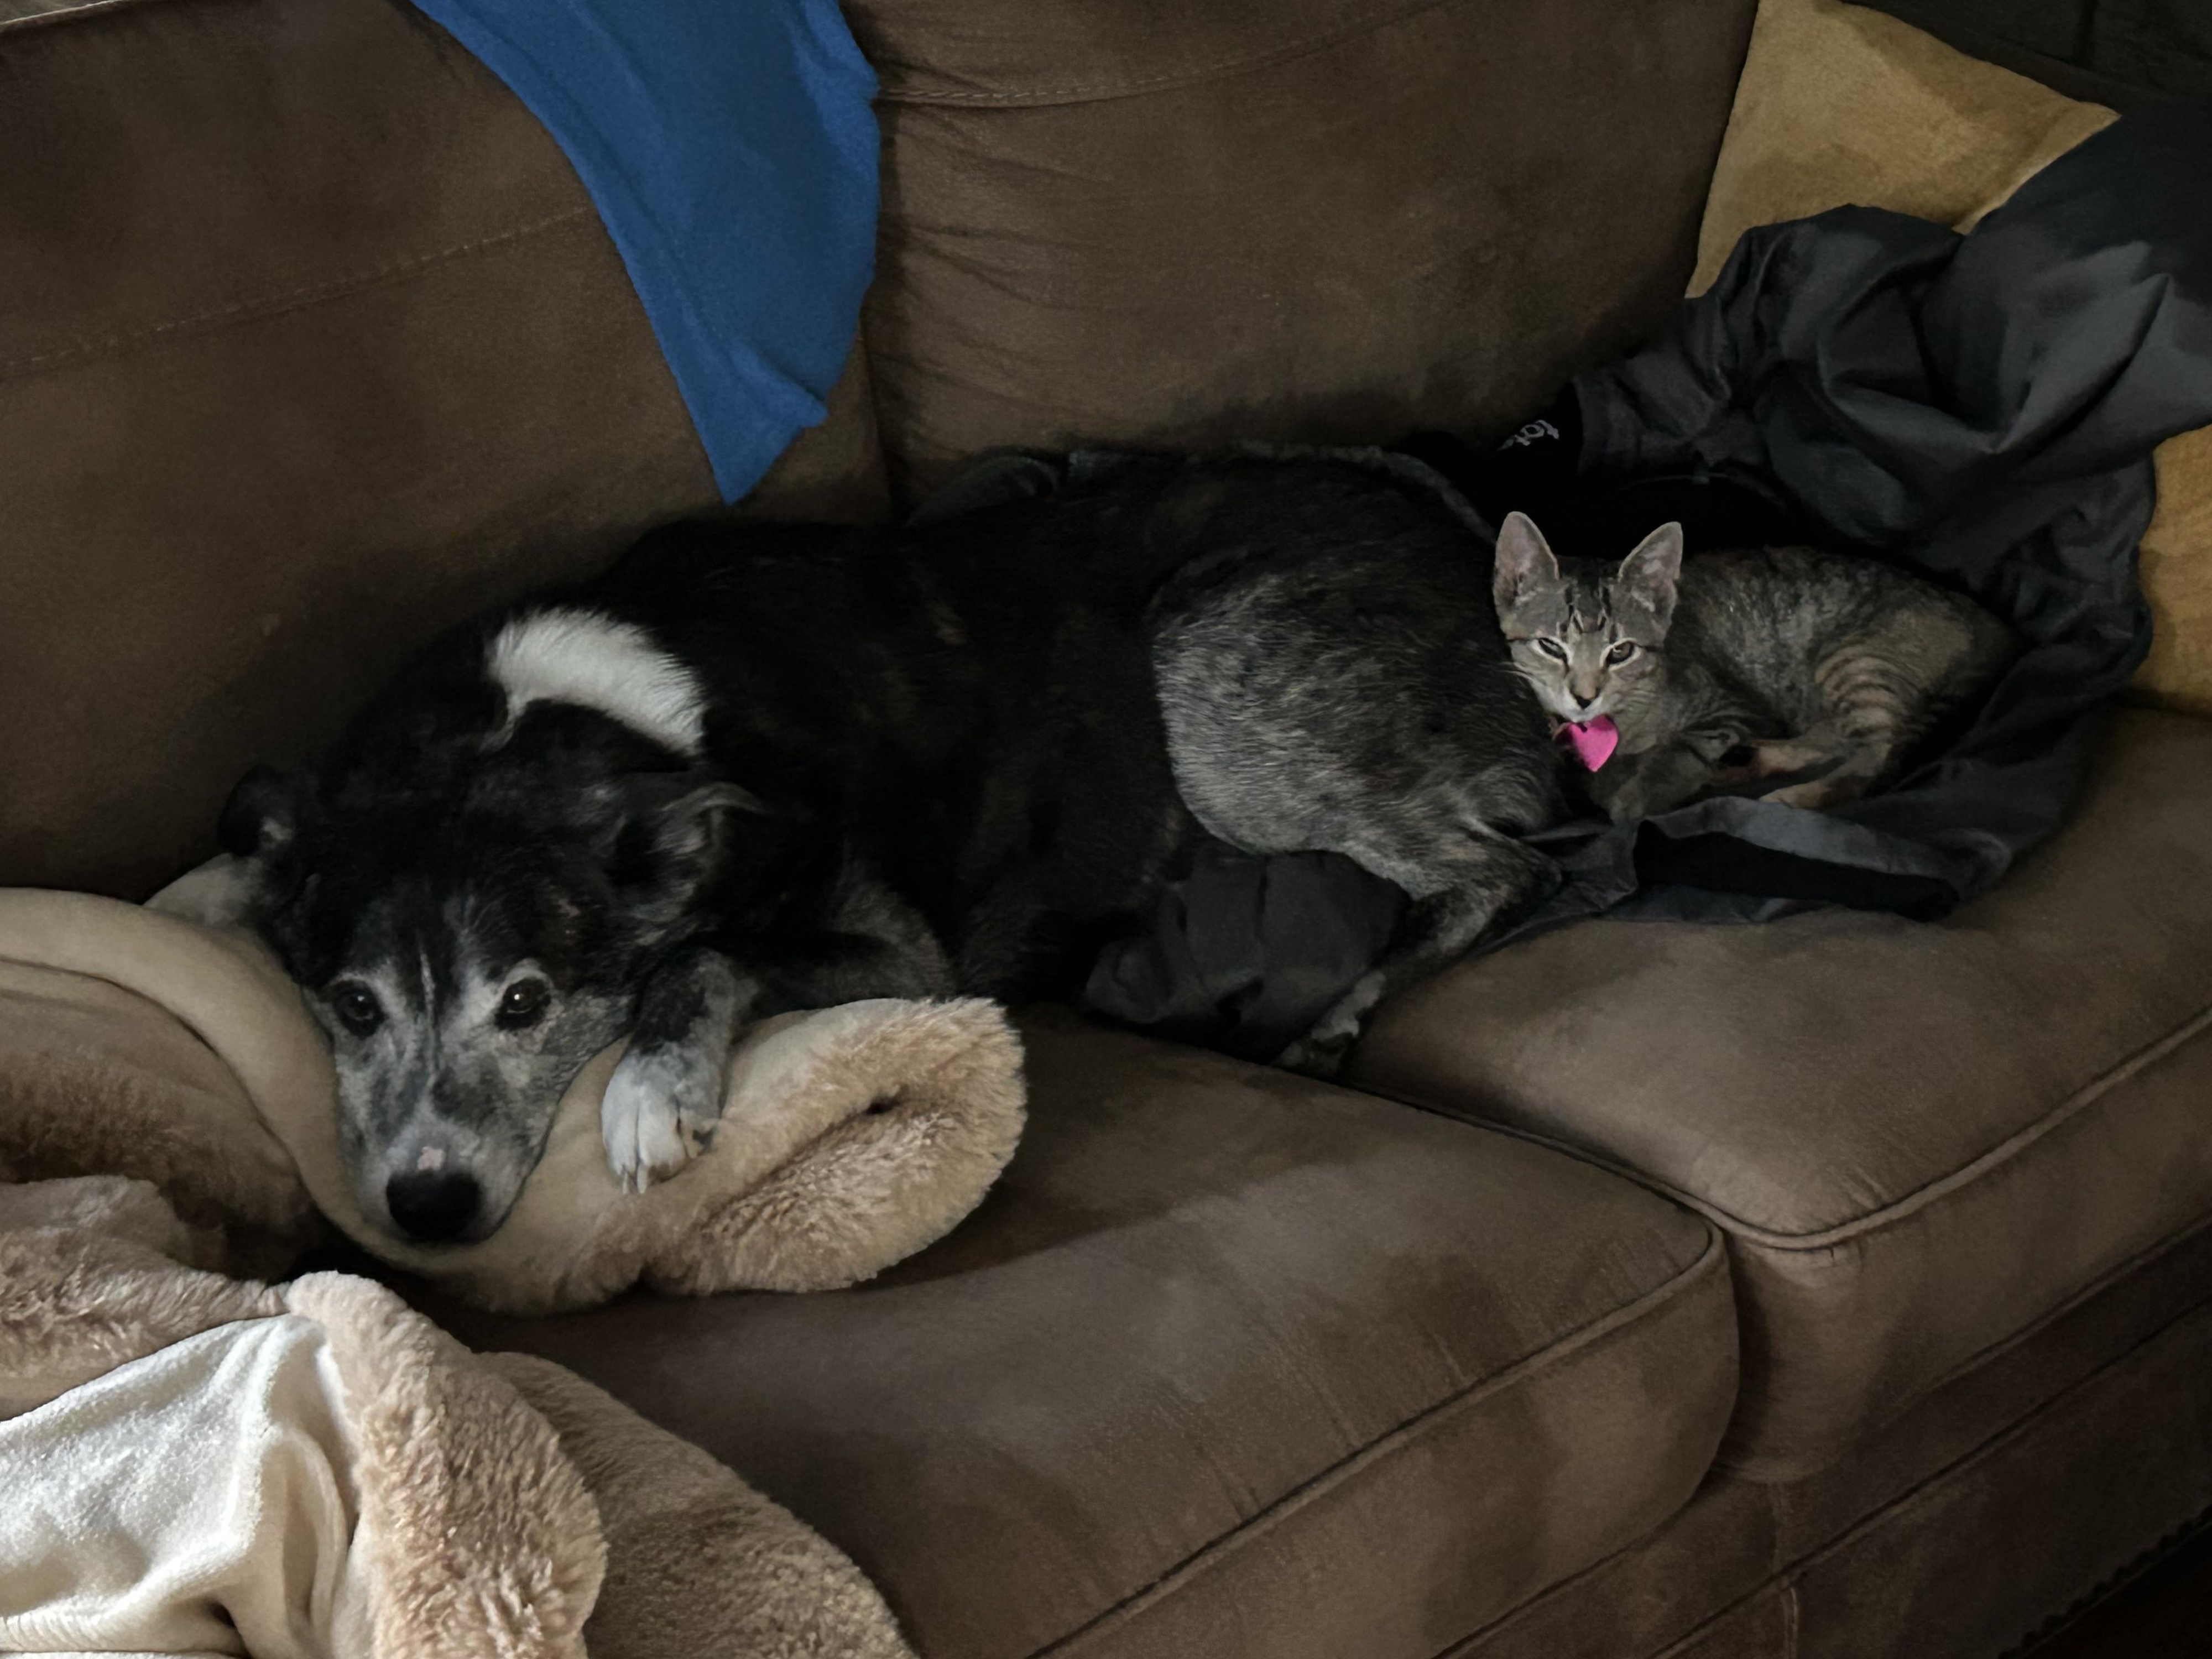 A cat and dog snuggling on a sofa